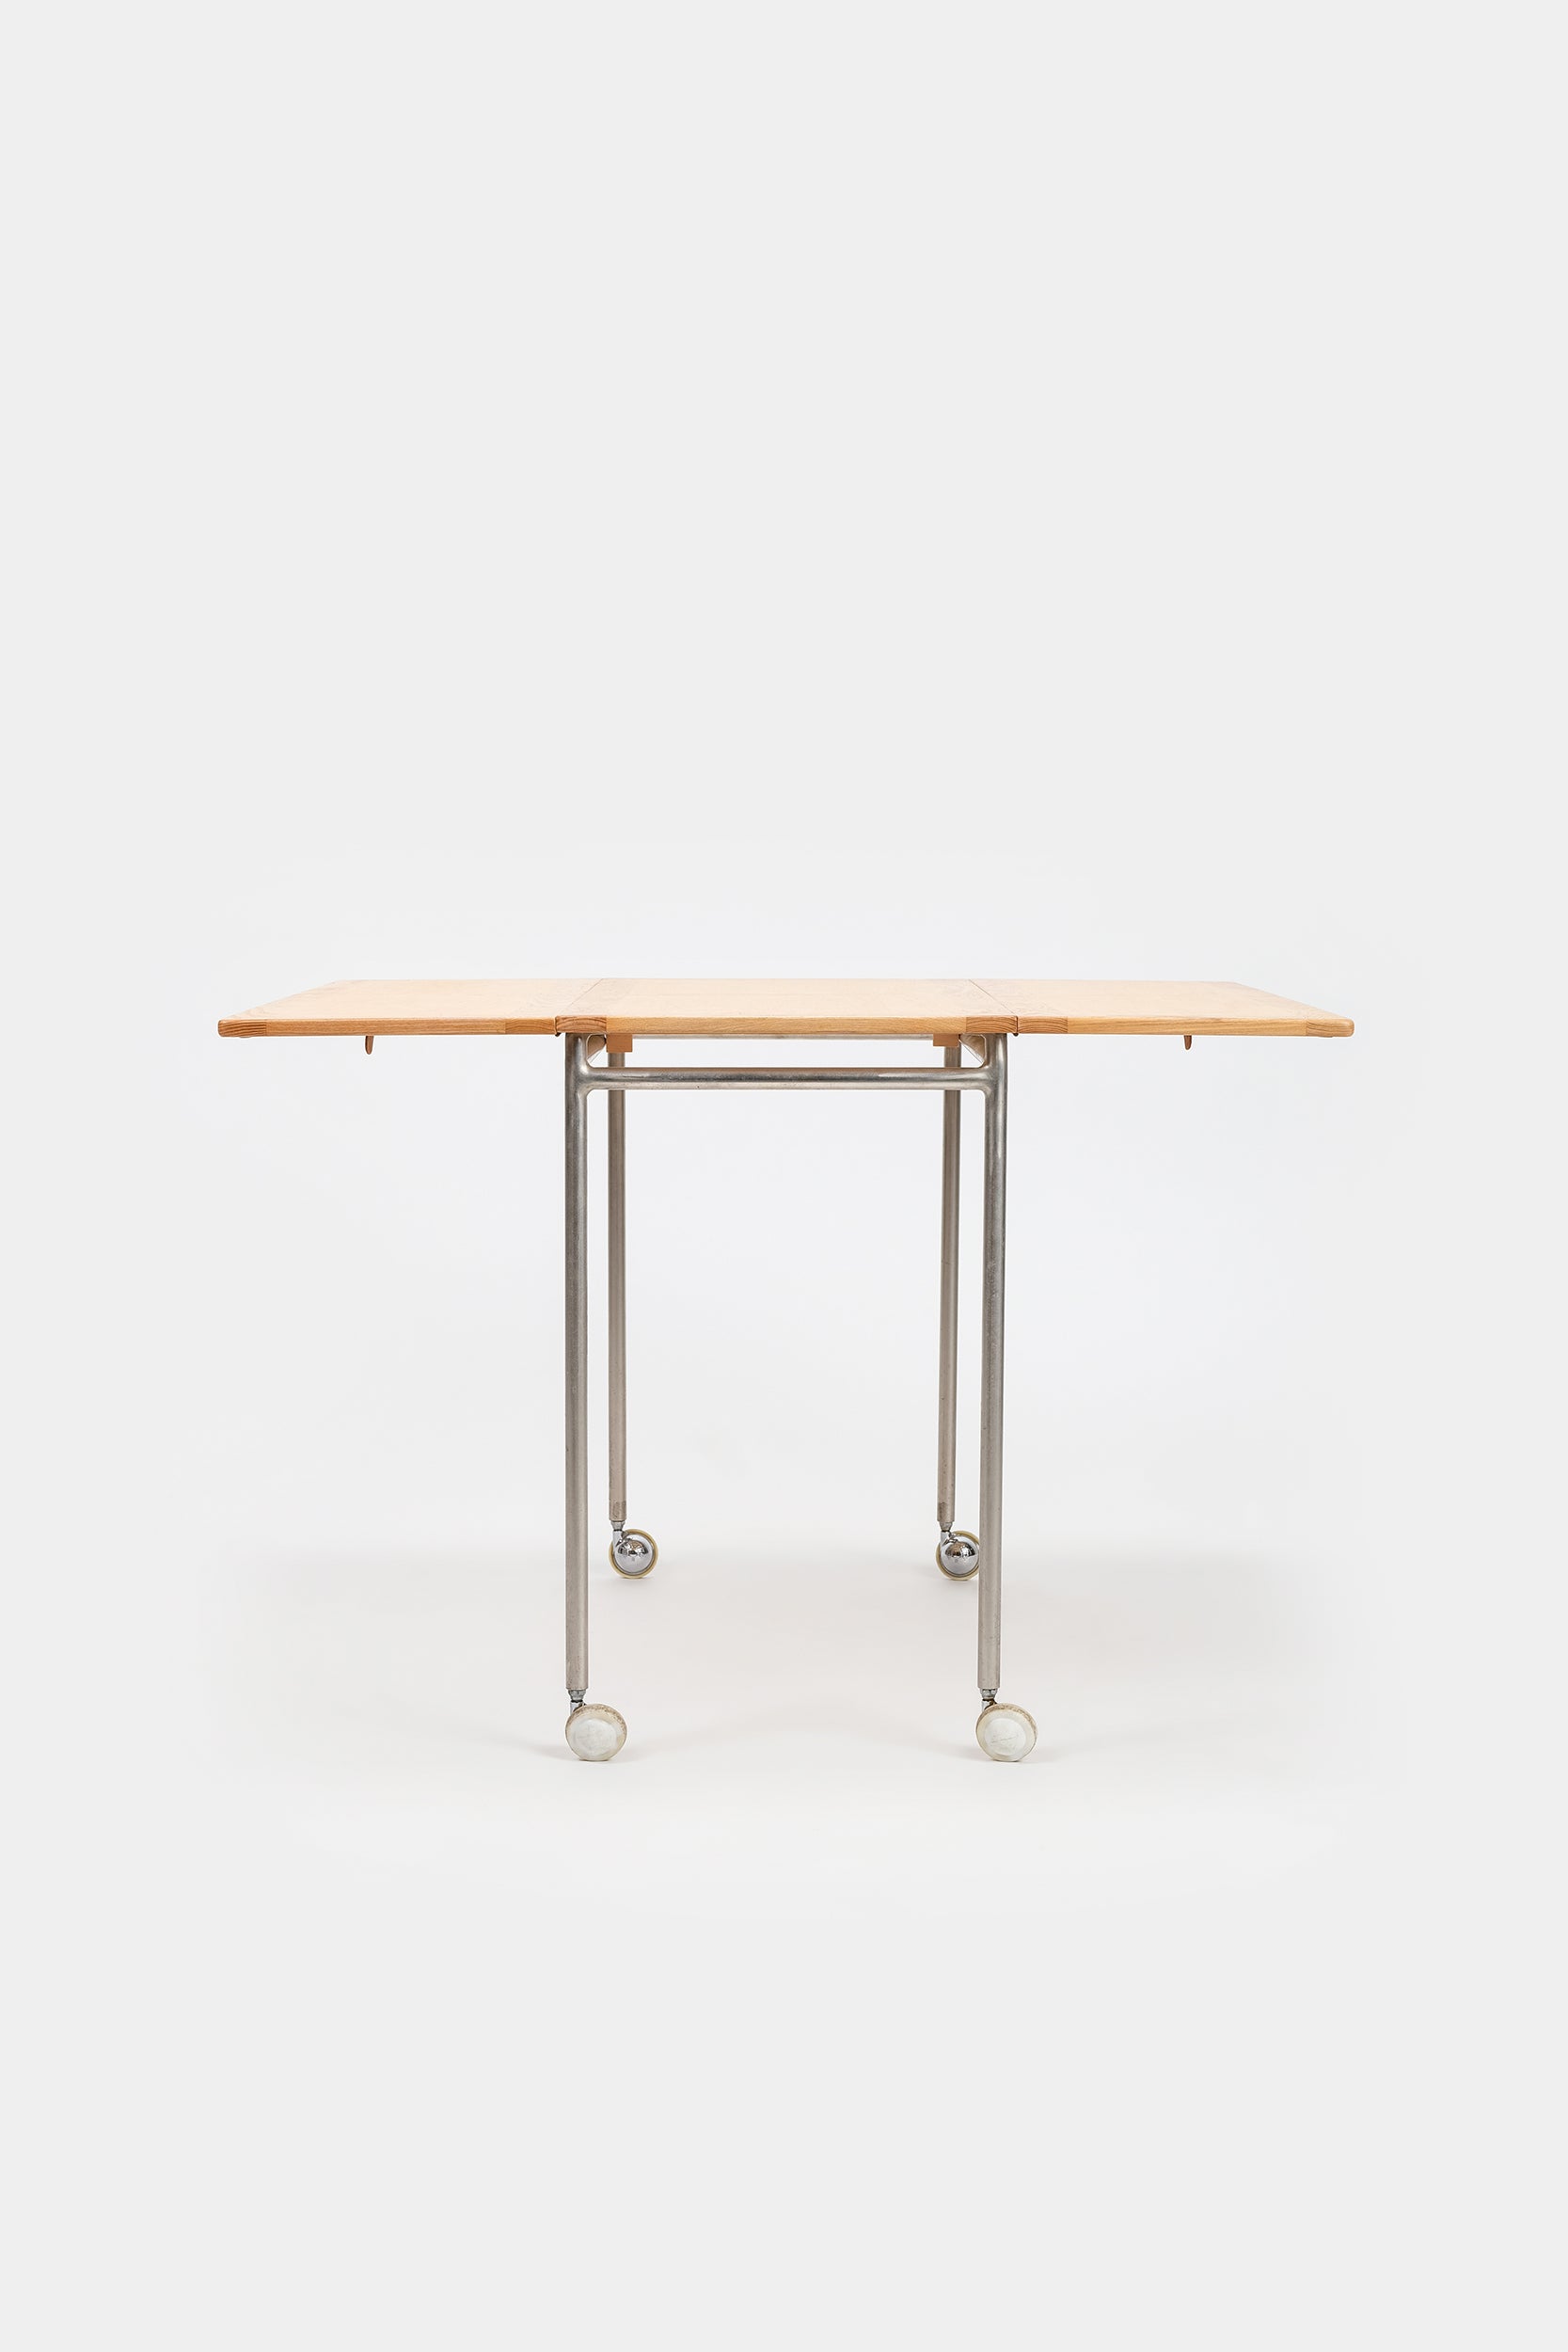 Bruno Mathsson Rolling Table, Sweden, 60s